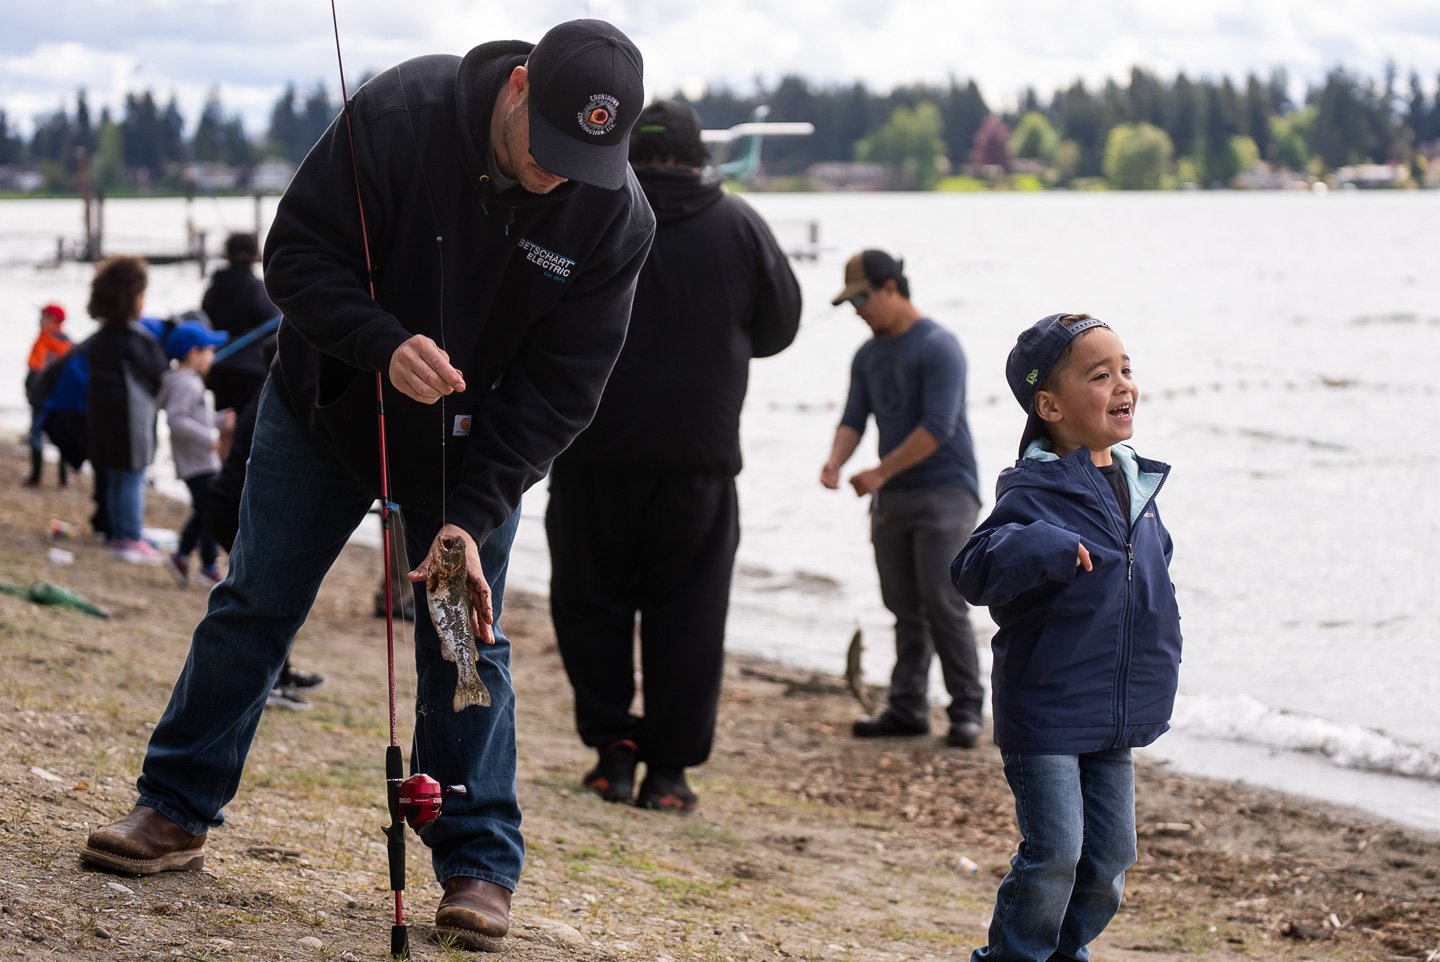 Youth Fishing Event - City of Lakewood